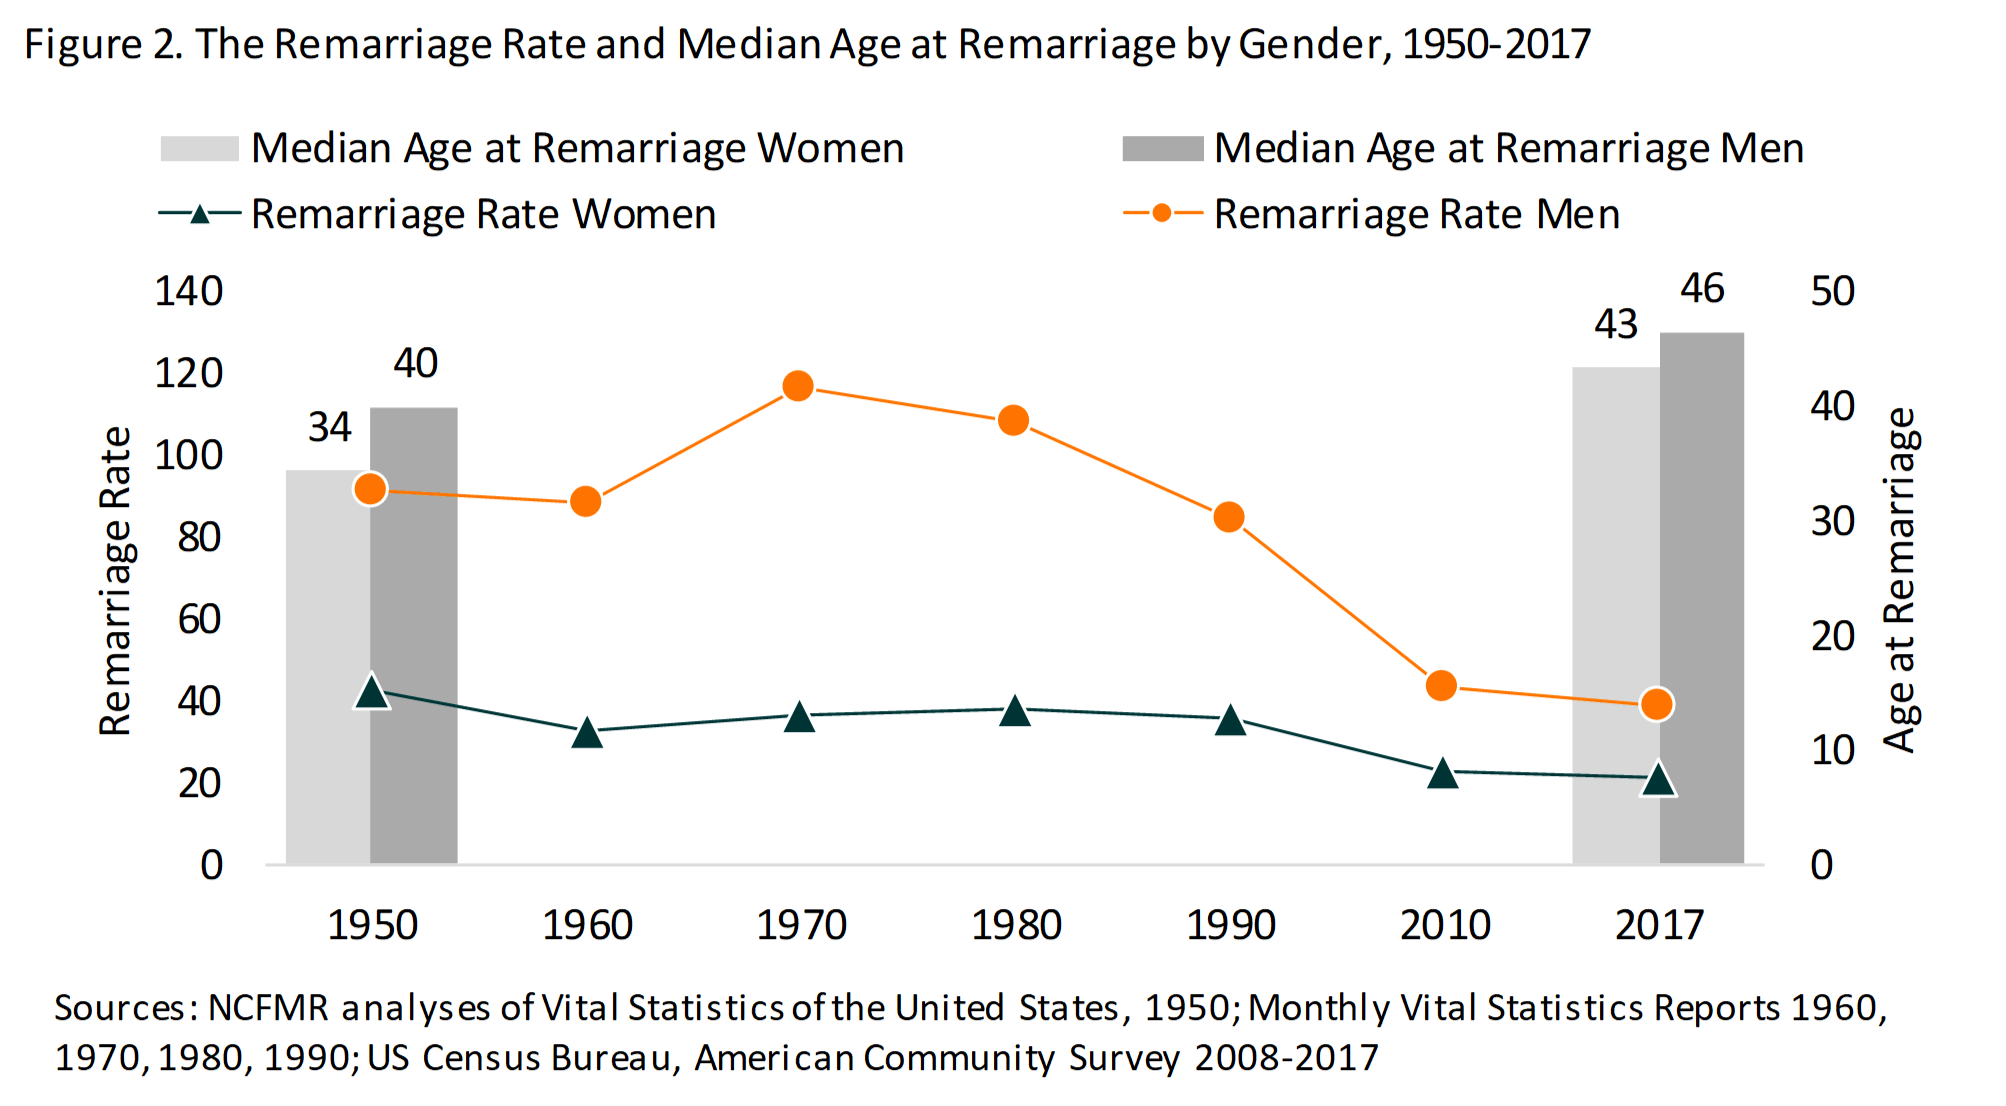 Line chart showing remarriage rate and median age at remarriage by gender from '50-'17